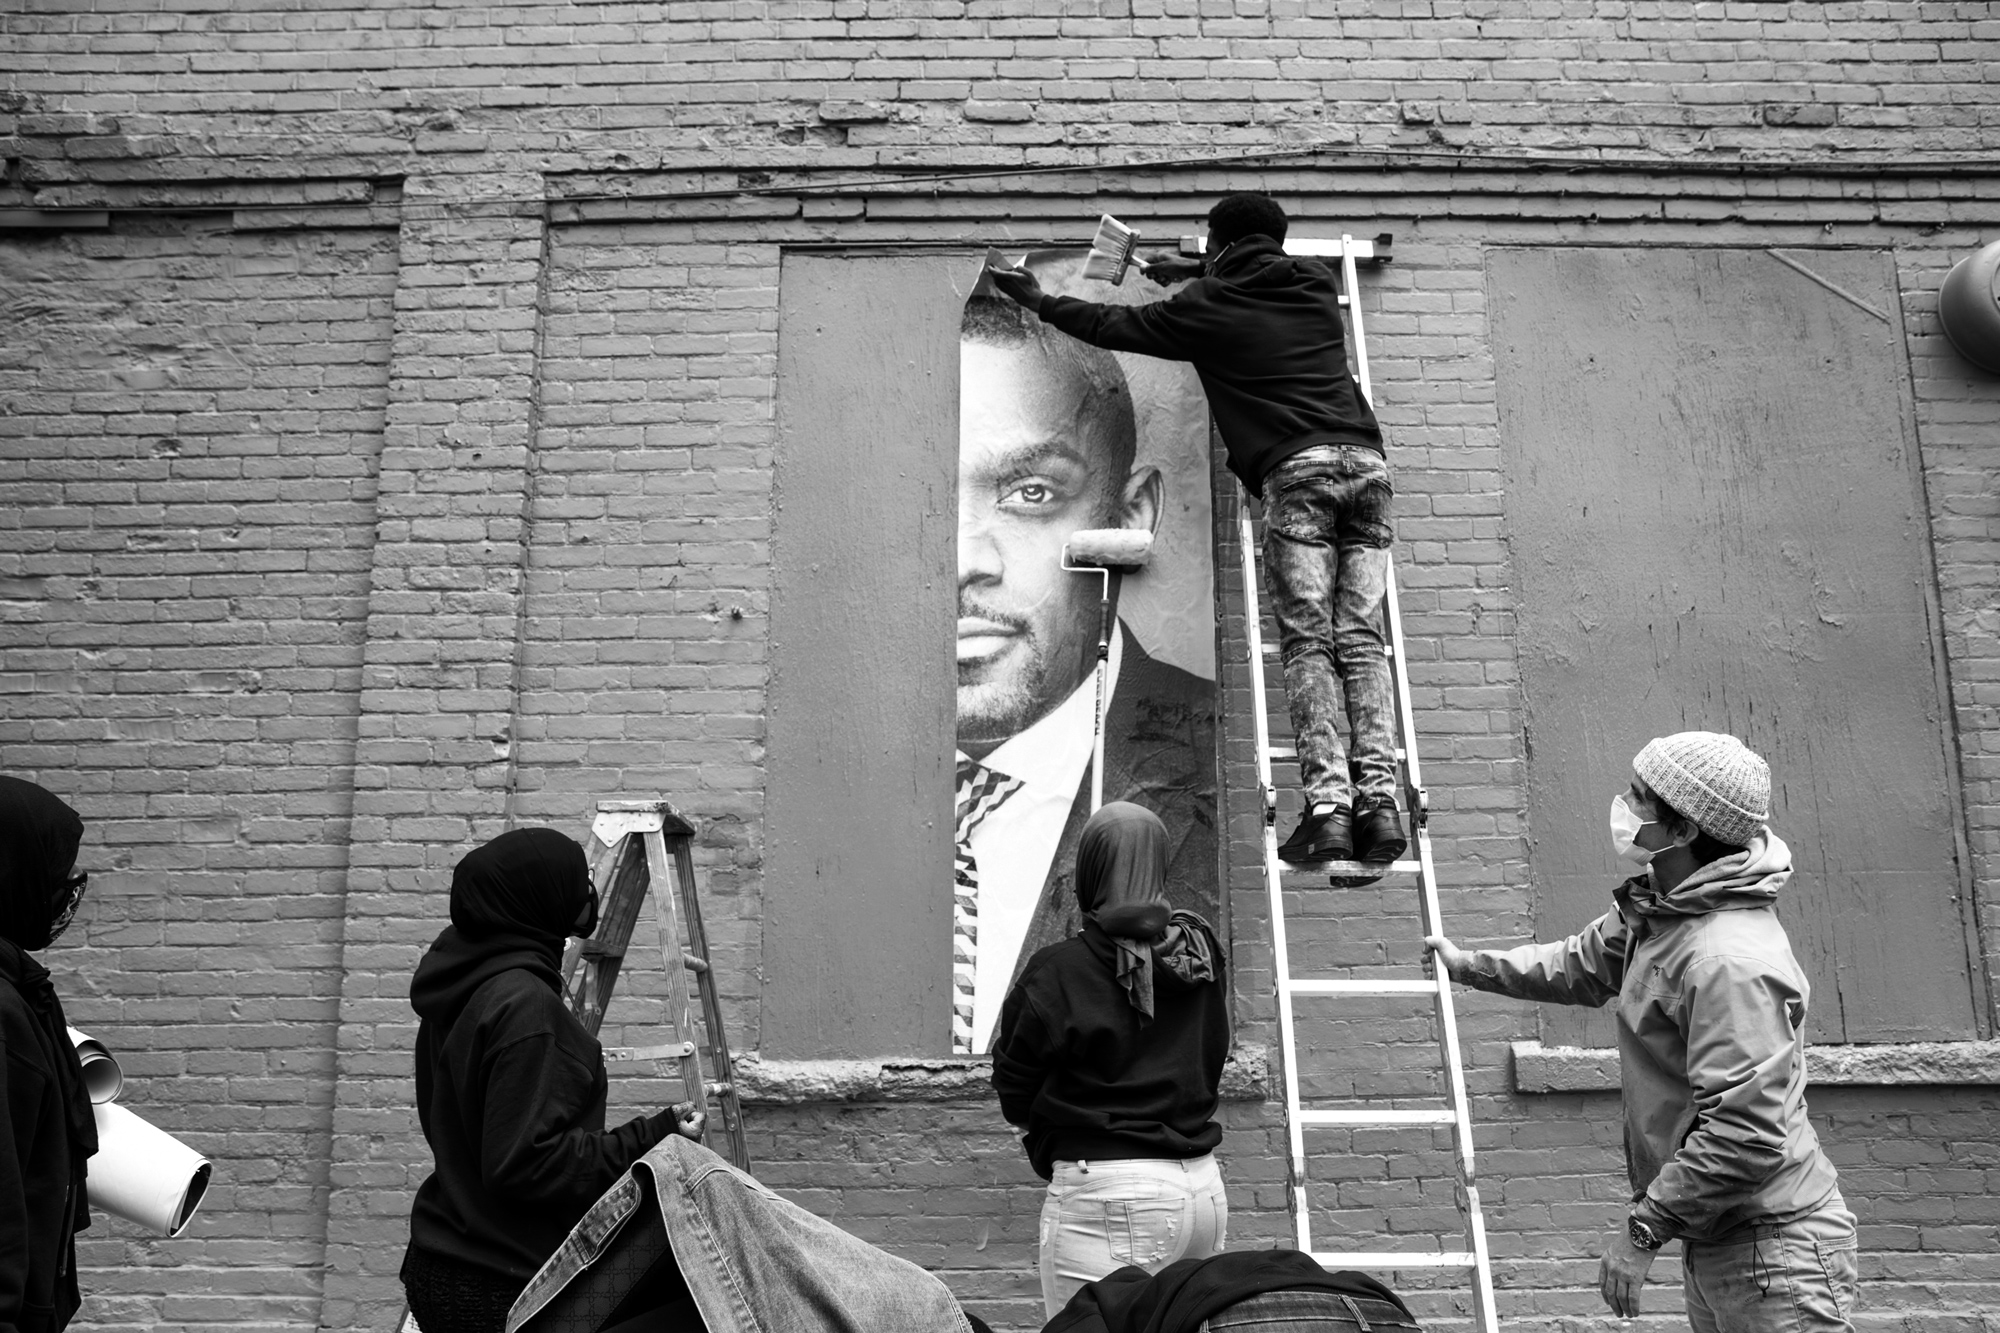 black and white photo of people hanging a person's portrait on the side of a brick building